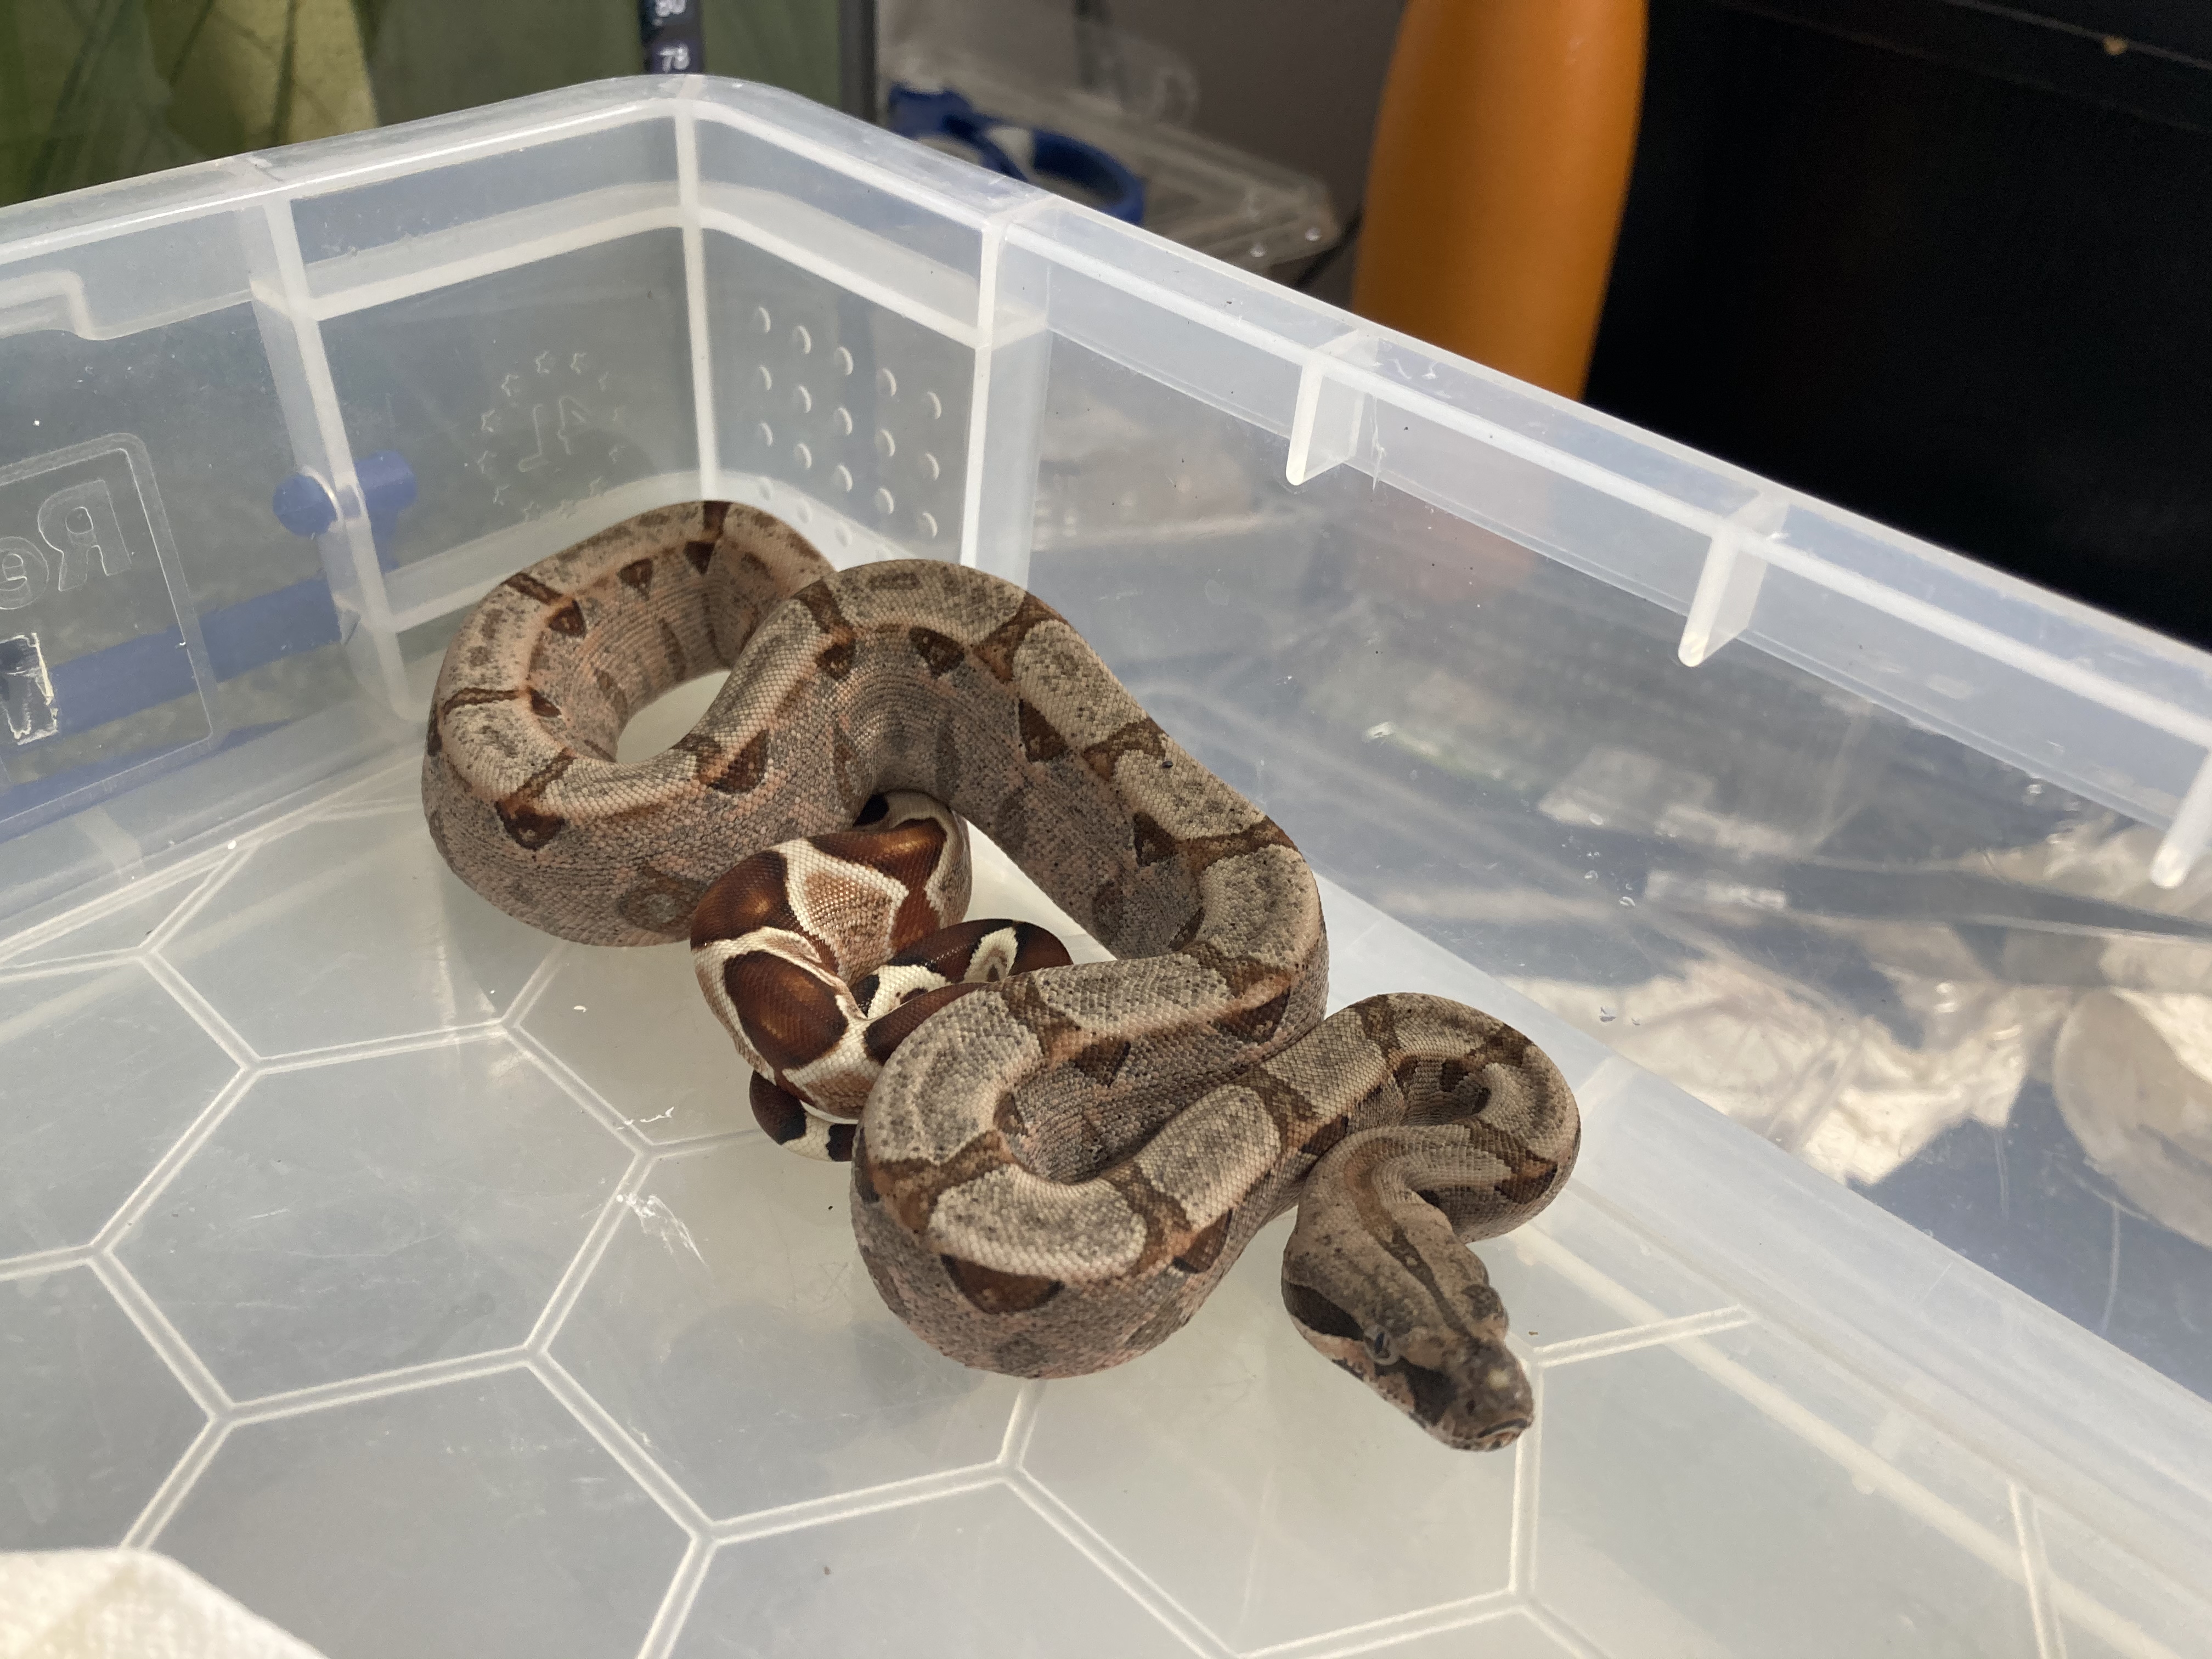 lethargic baby boa constrictor